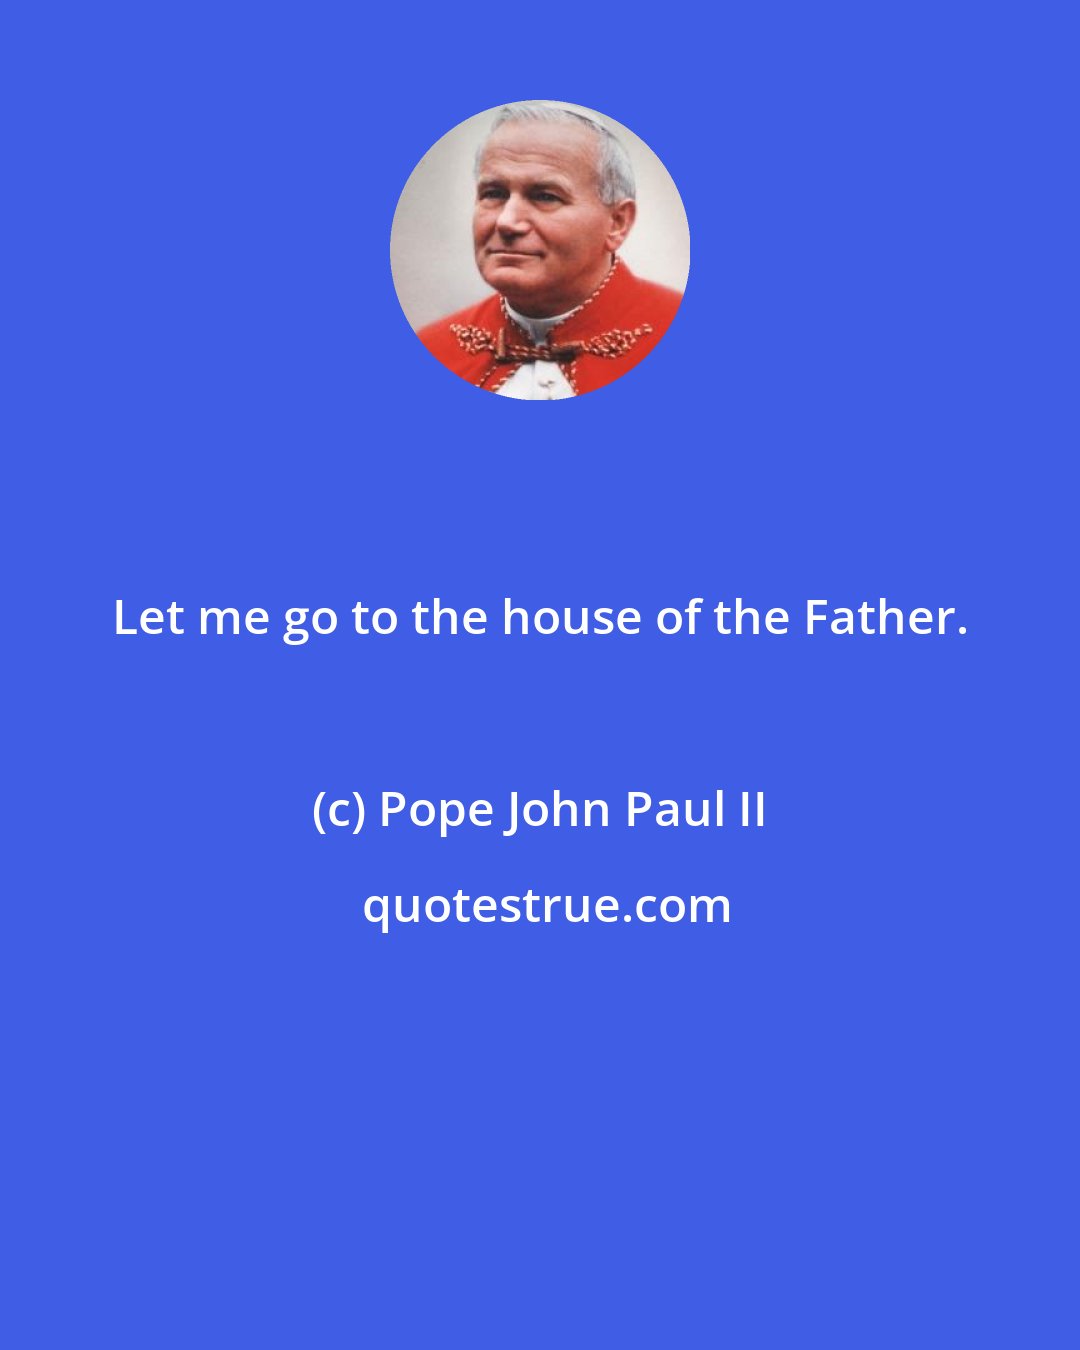 Pope John Paul II: Let me go to the house of the Father.